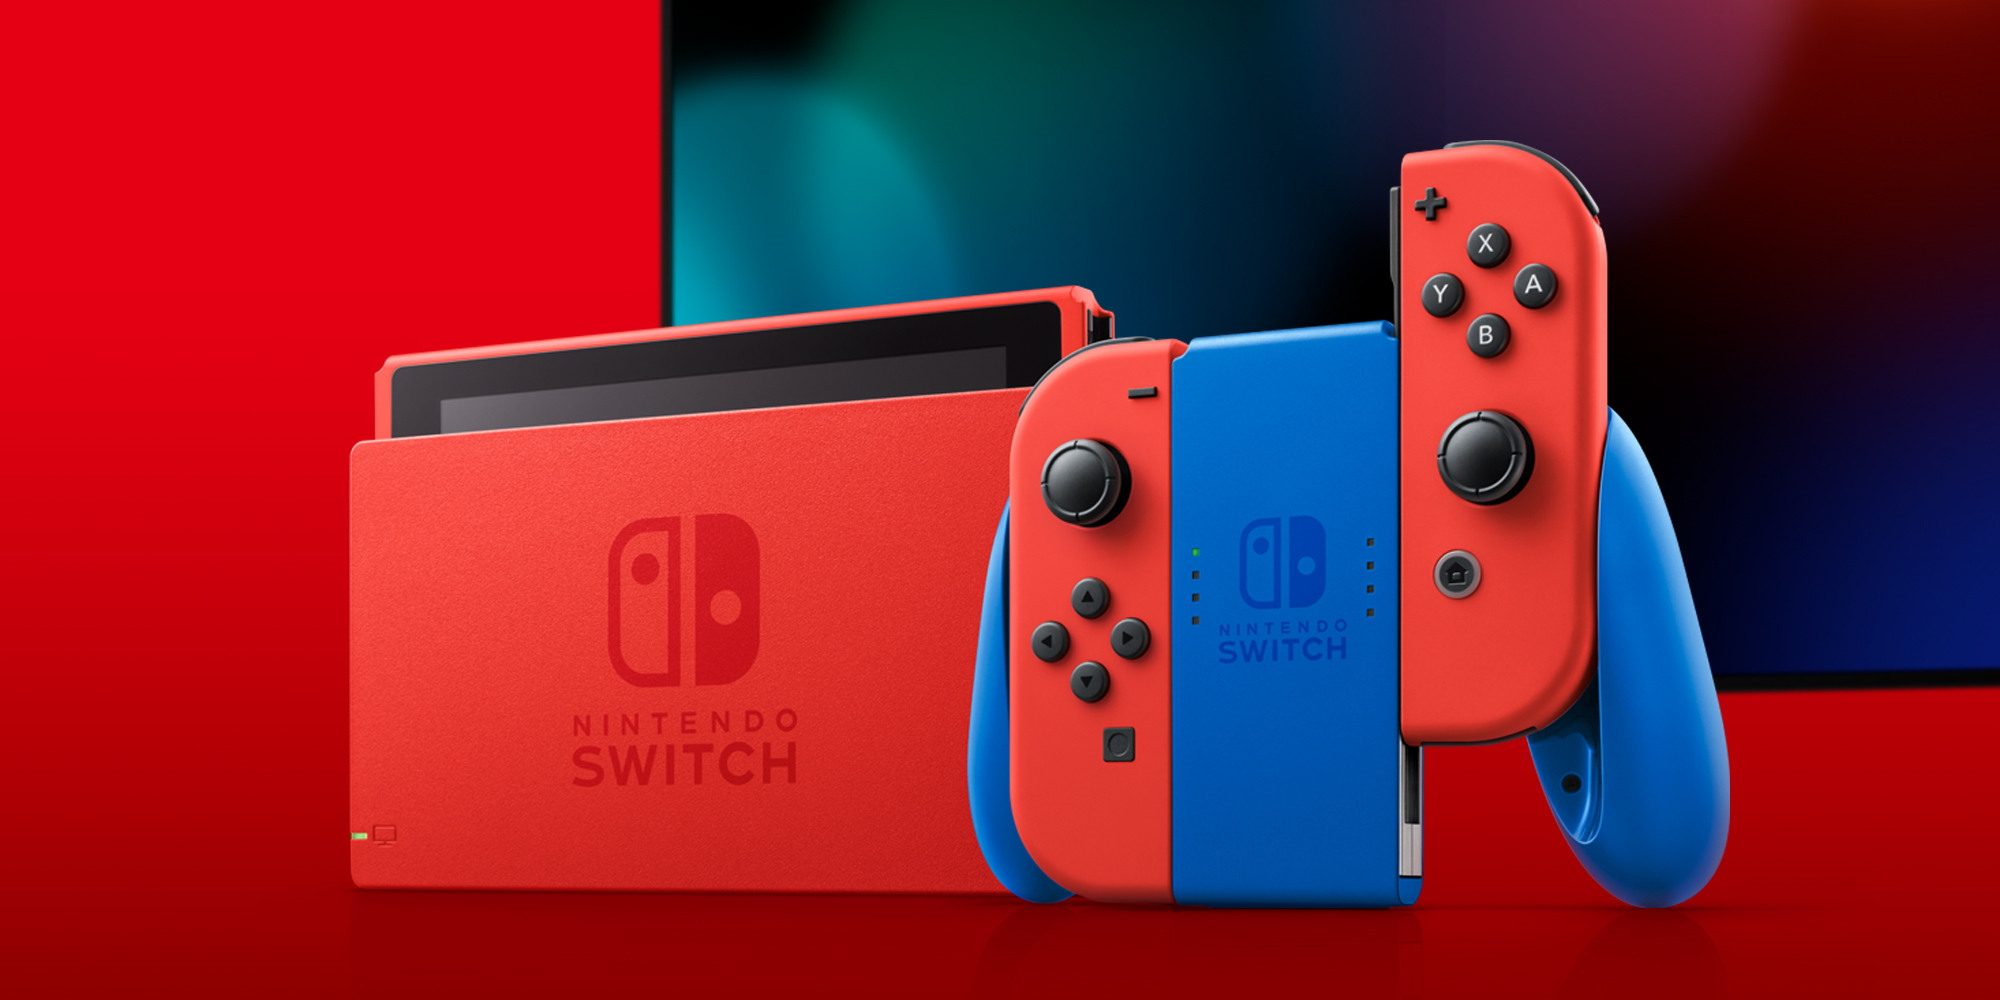 A new Mario Red & Blue Nintendo Switch is coming in February